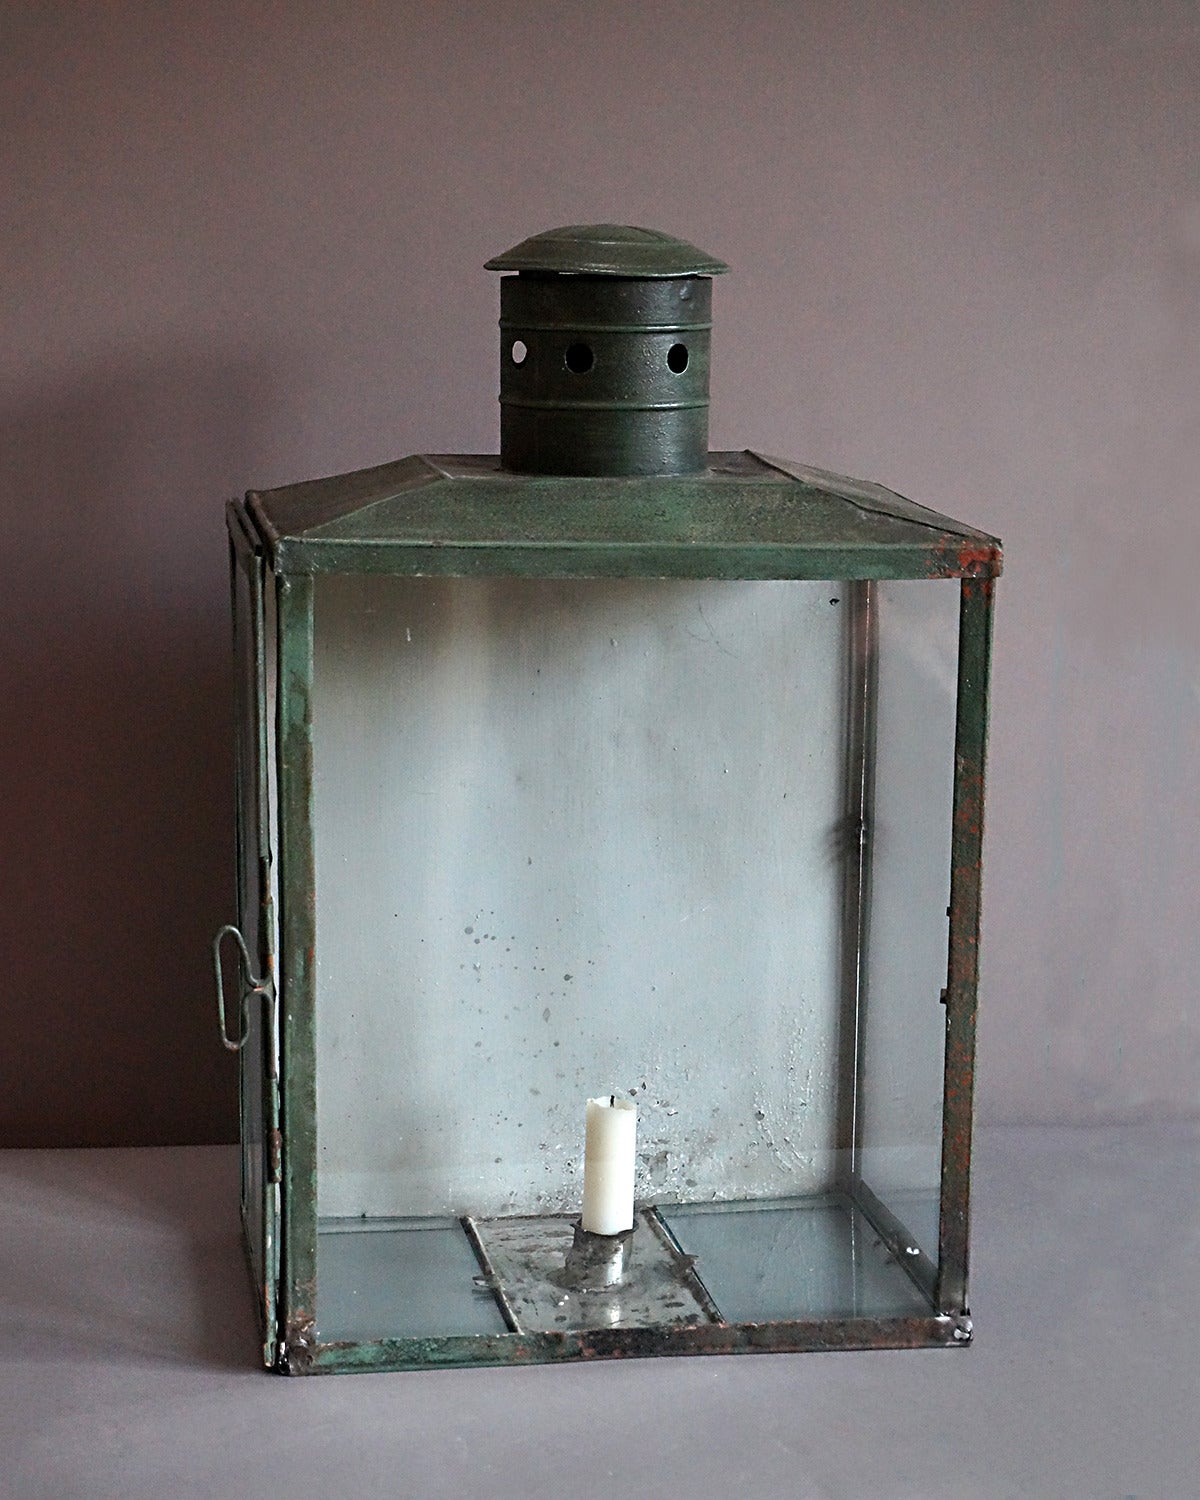 Swedish candle lantern, circa 1900, with glass front and sides. The back is solid with a strap to allow the lantern to be hung on or placed against a wall. In verdigris finish.